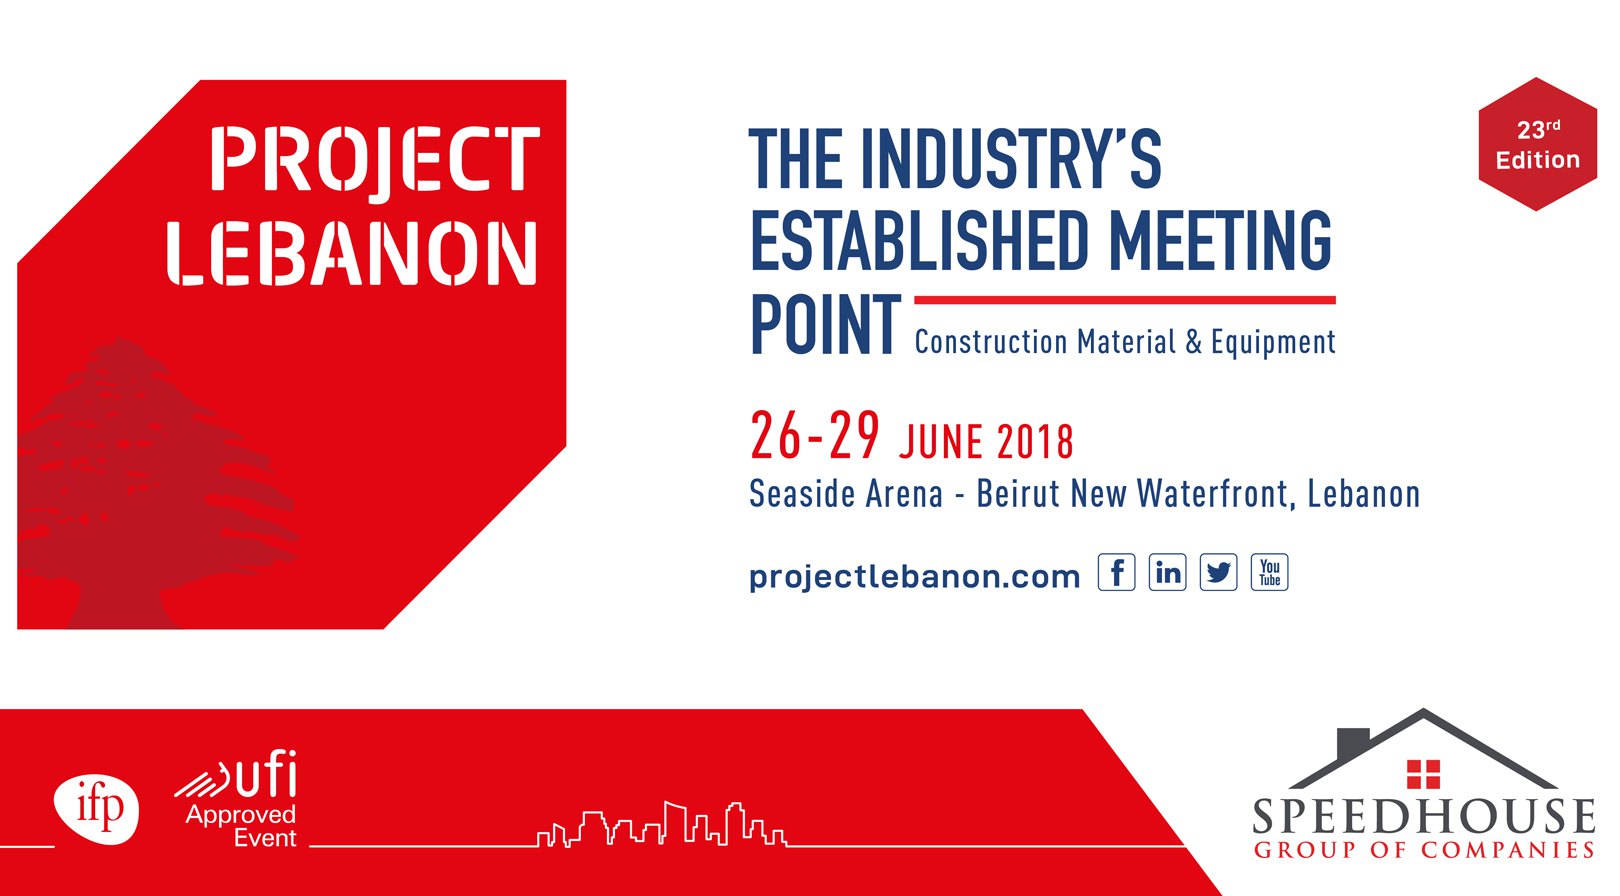 Speed House Group at Project Lebanon Event - Beirut New Waterfront, Lebanon